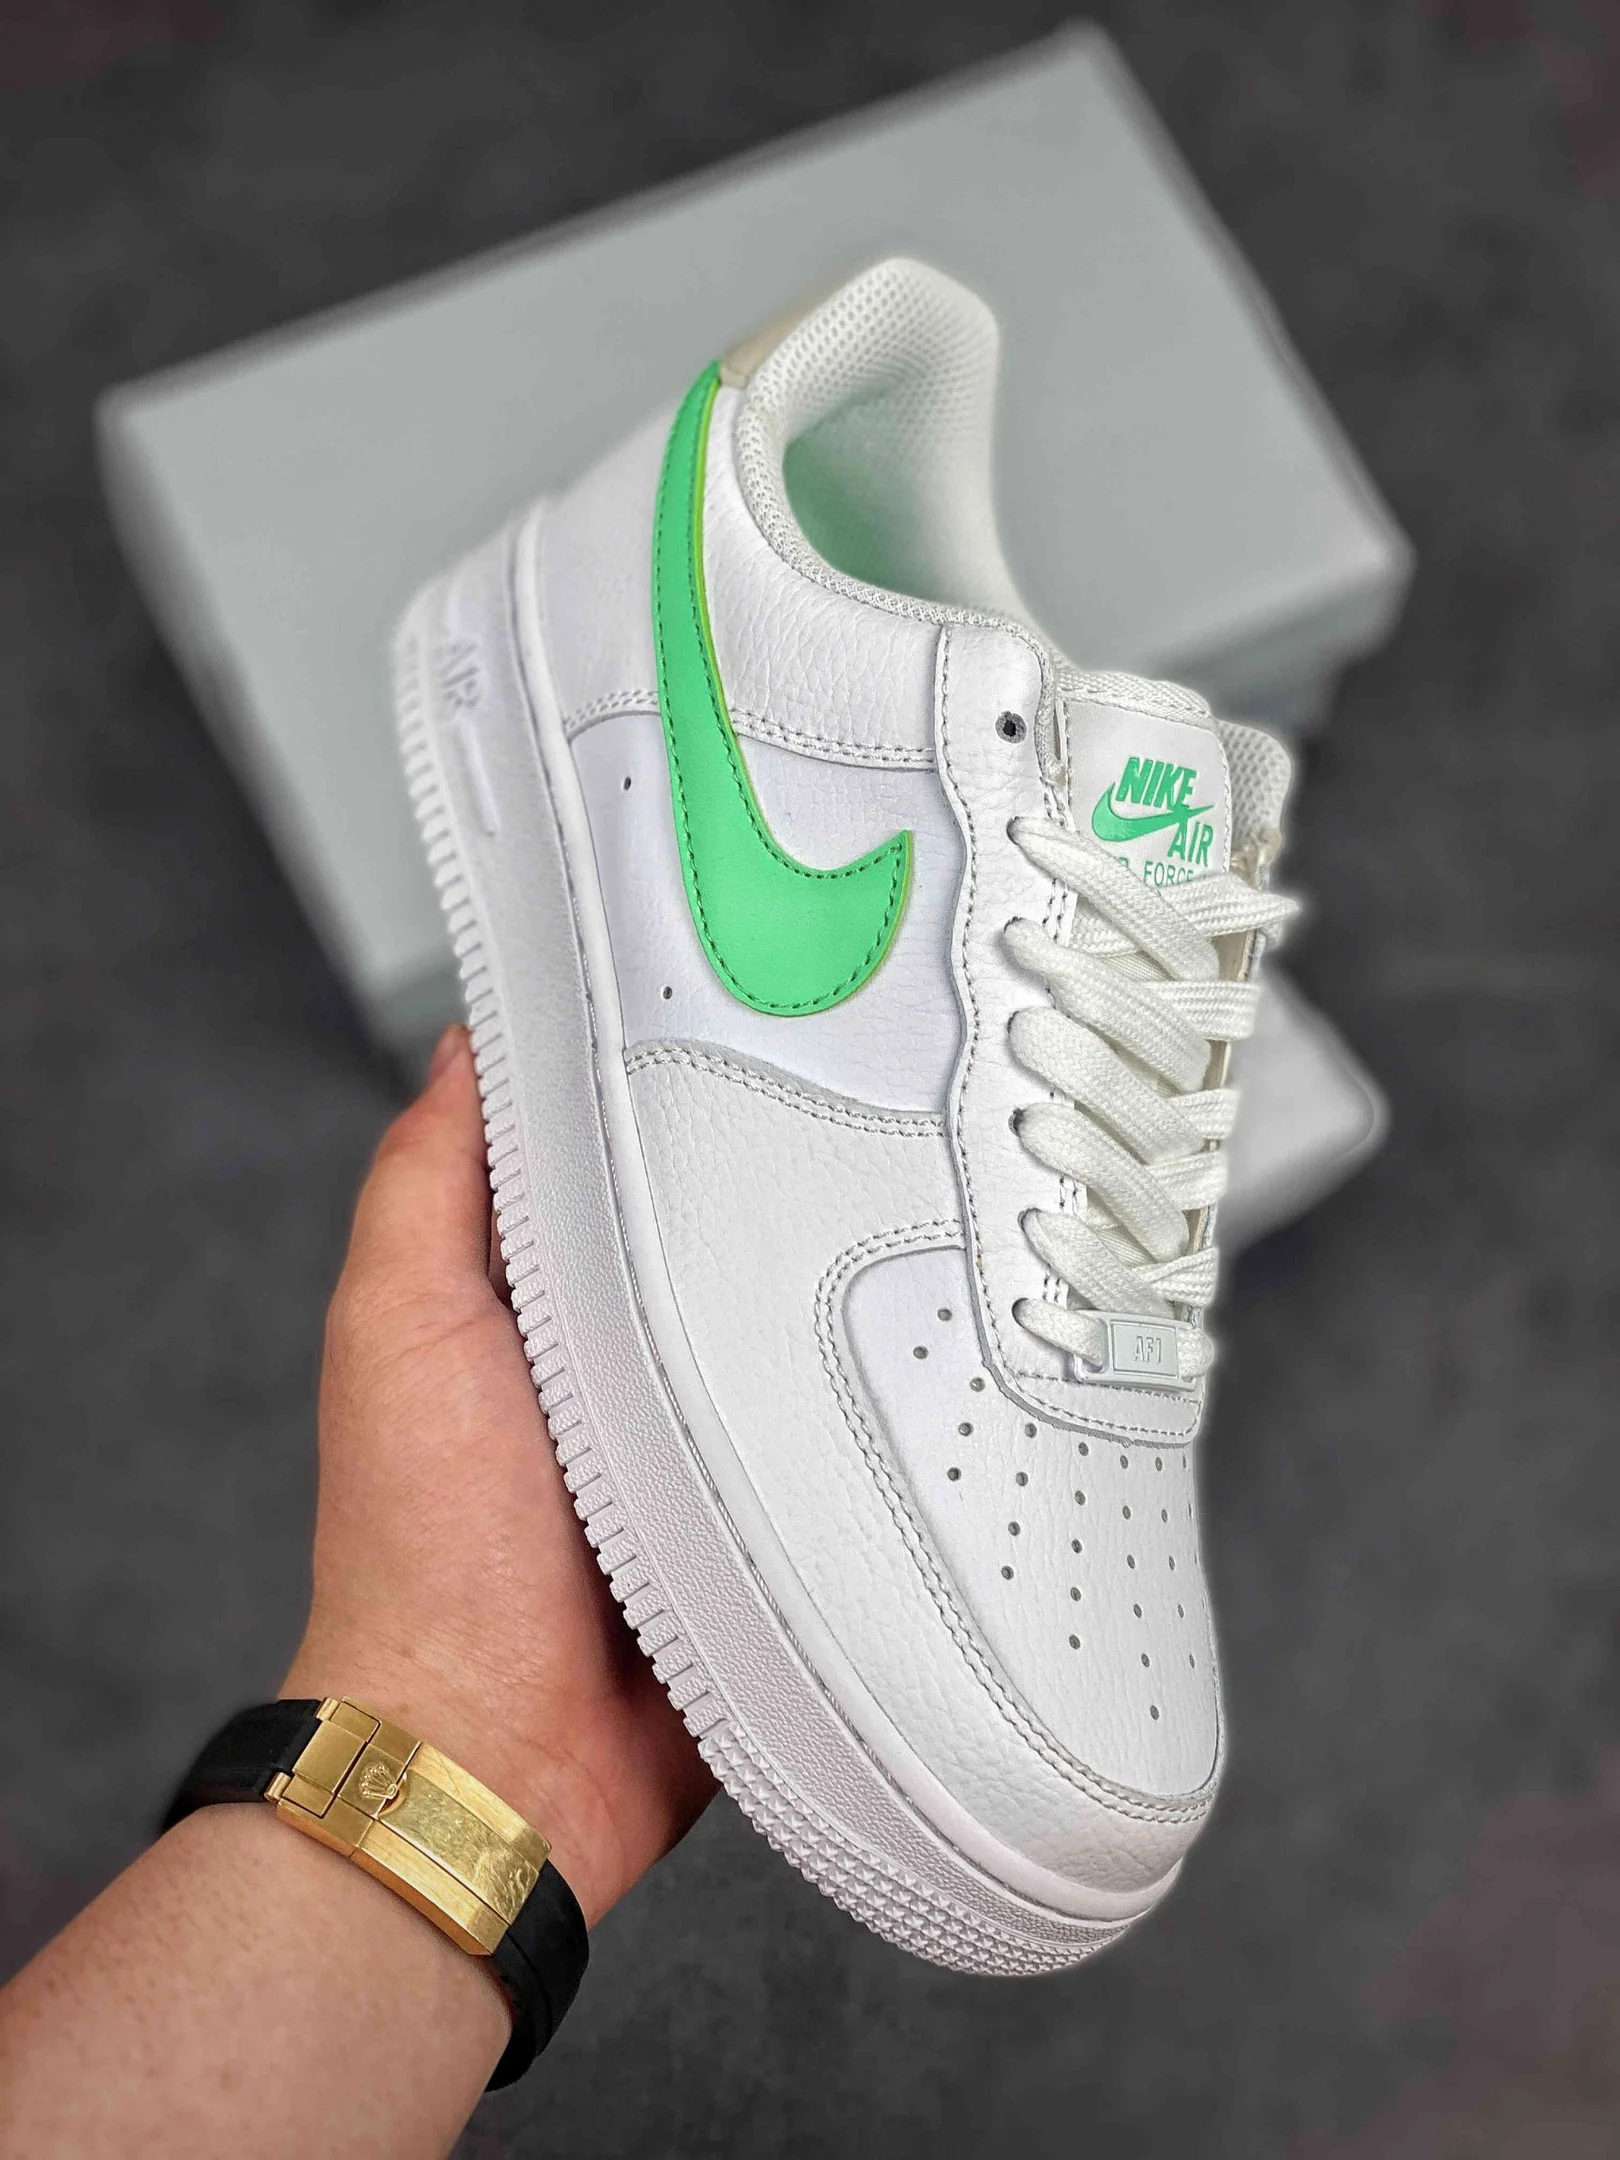 Nike Air Force 1 Low White Light Bone-Green Glow For Sale